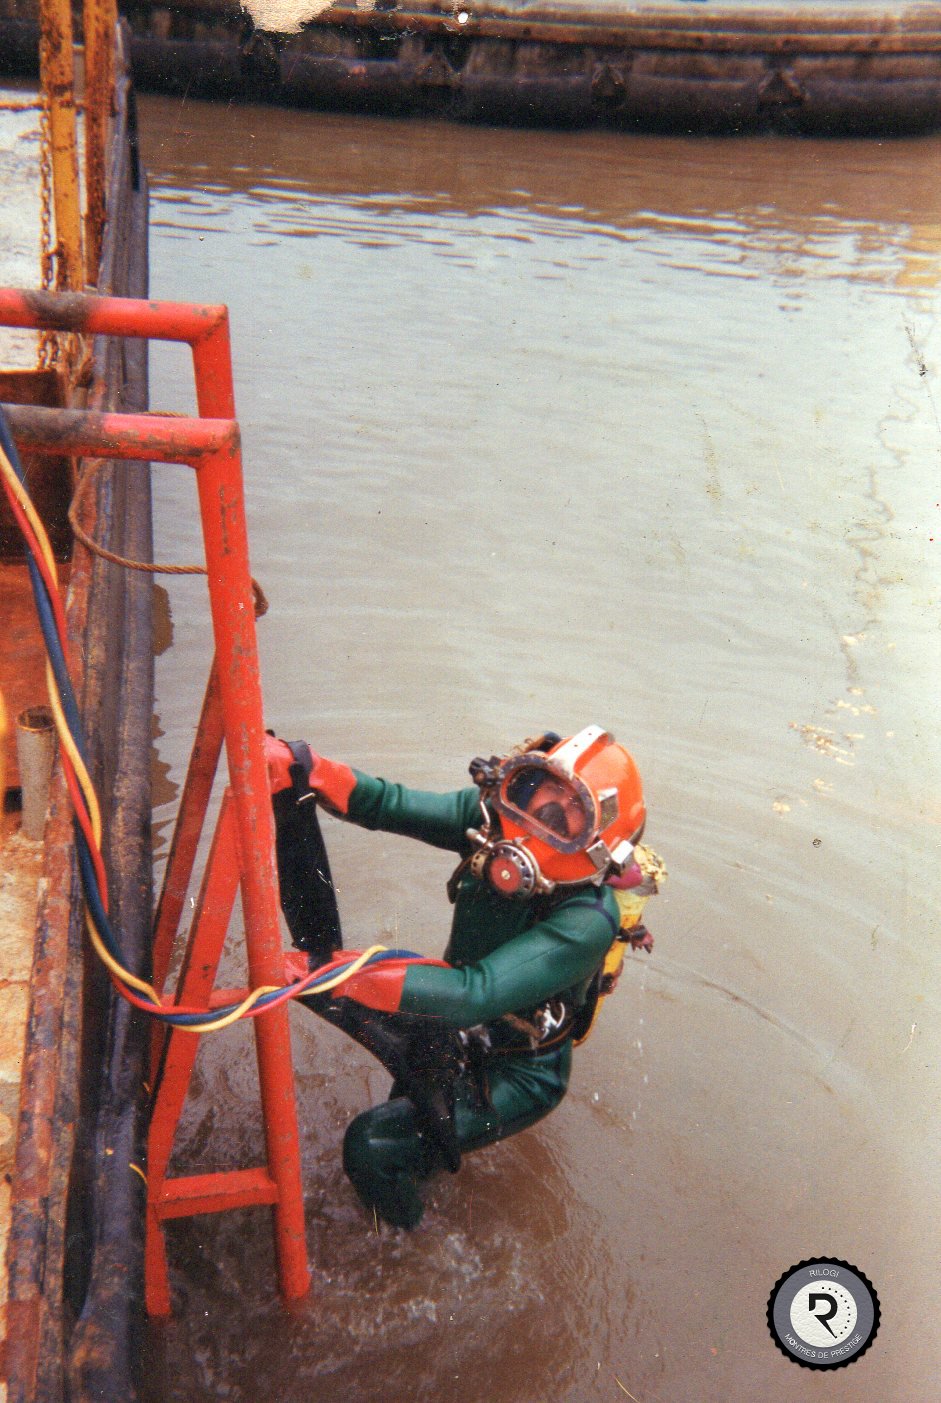 FRED JOLY, COMEX DIVER